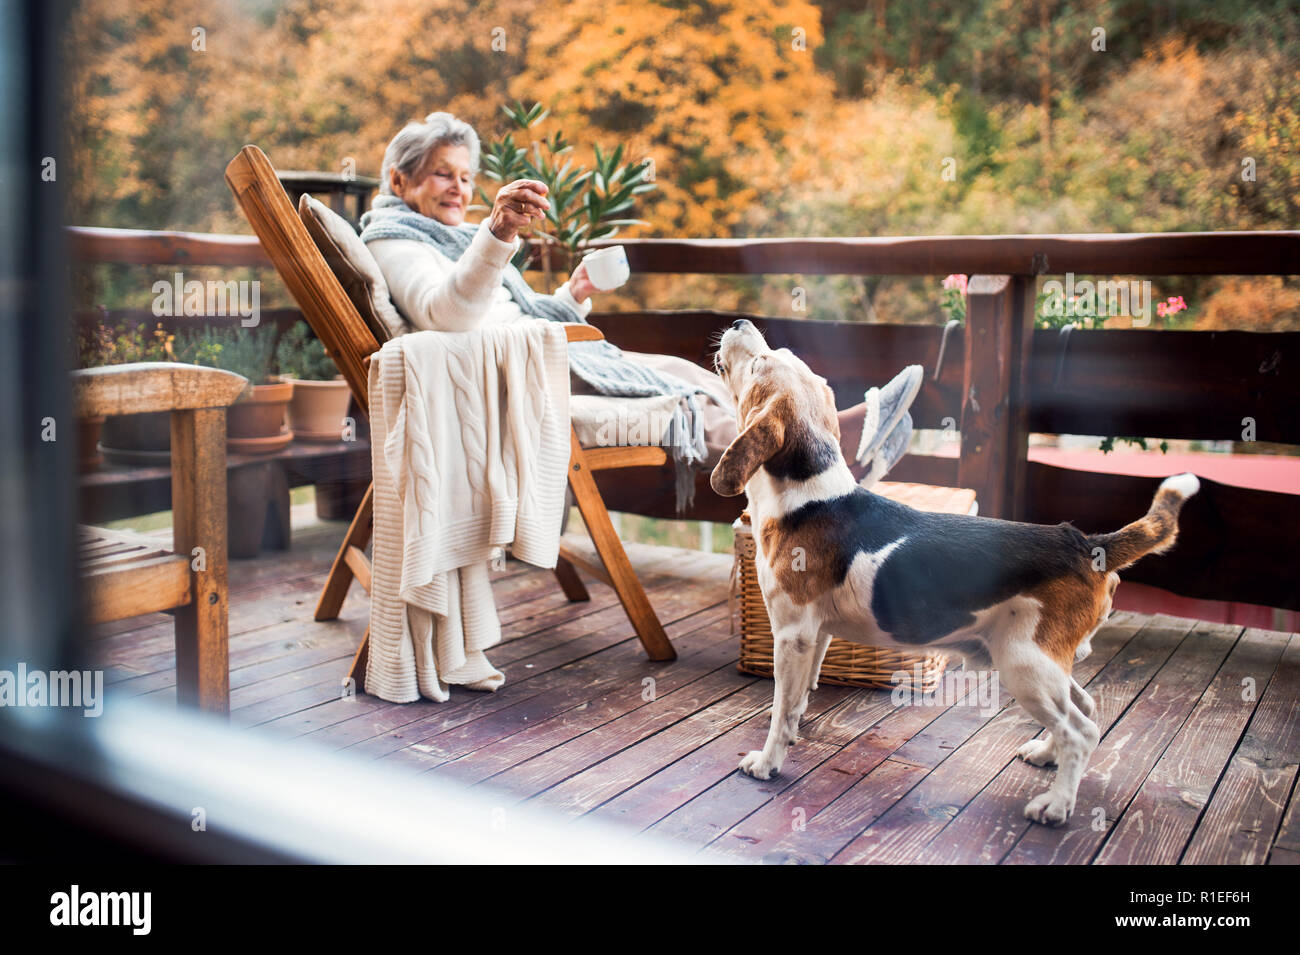 An elderly woman with a dog sitting outdoors on a terrace on a sunny day in autumn. Stock Photo